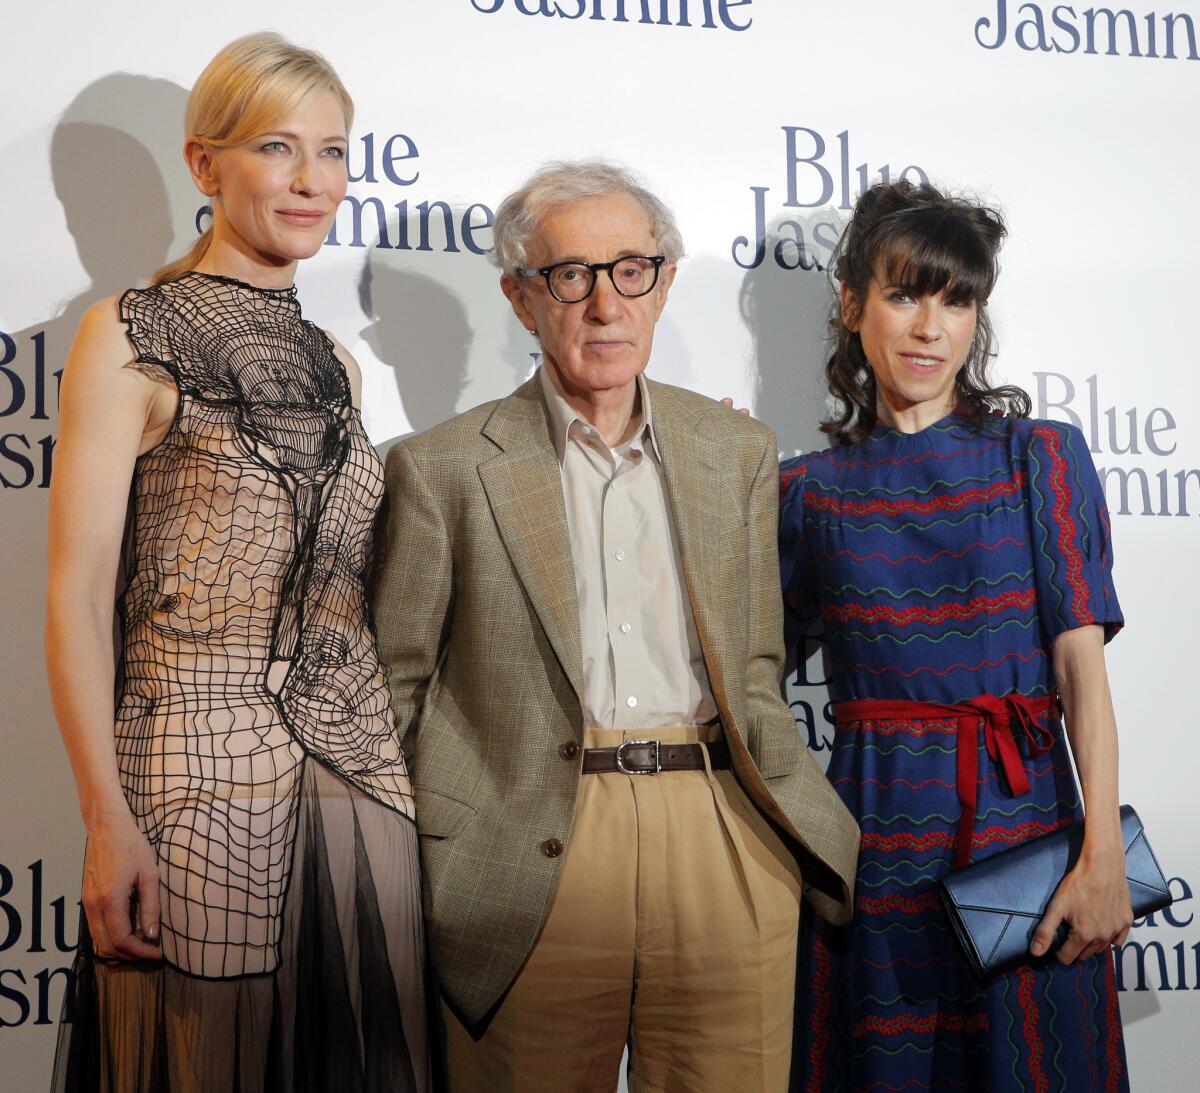 Director Woody Allen is to receive the Cecil B. De Mille Award at the Golden Globes in January. Here, he is with actresses Cate Blanchett, left, and Sally Hawkins at French premiere of "Blue Jasmine" in Paris earlier this year.